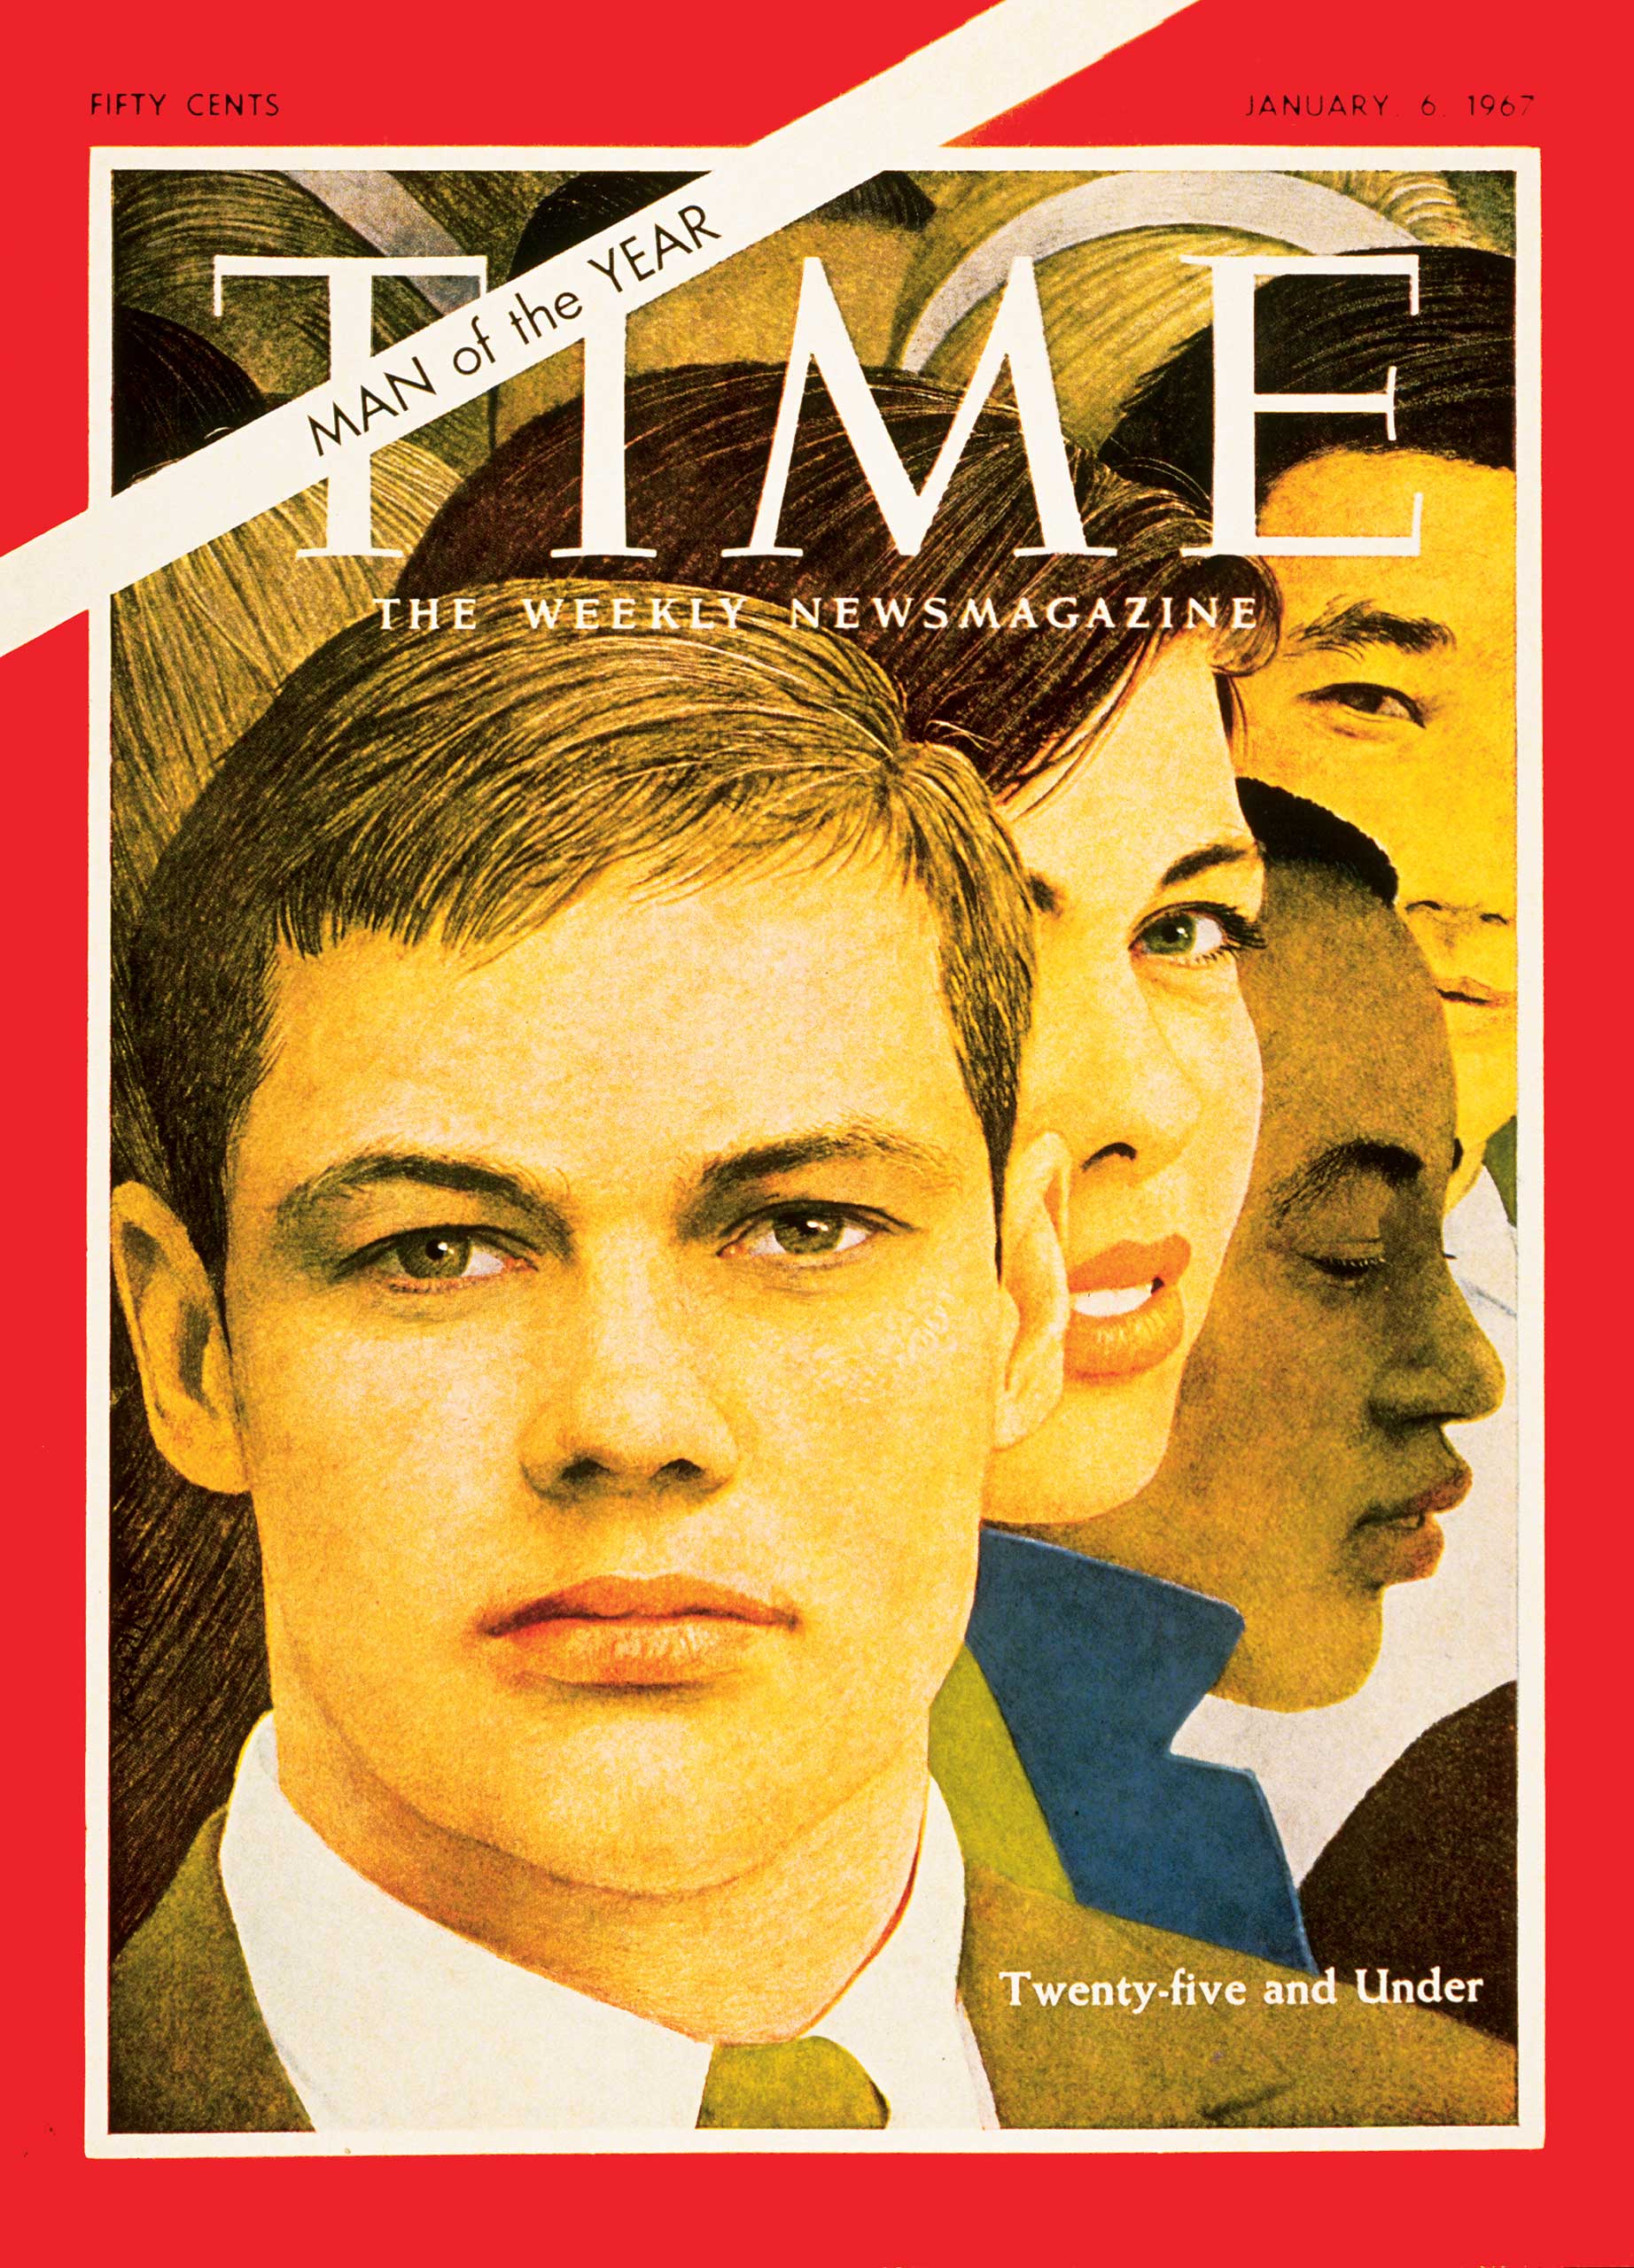 TIME person of the year 1966: Men and Women 25 and Under